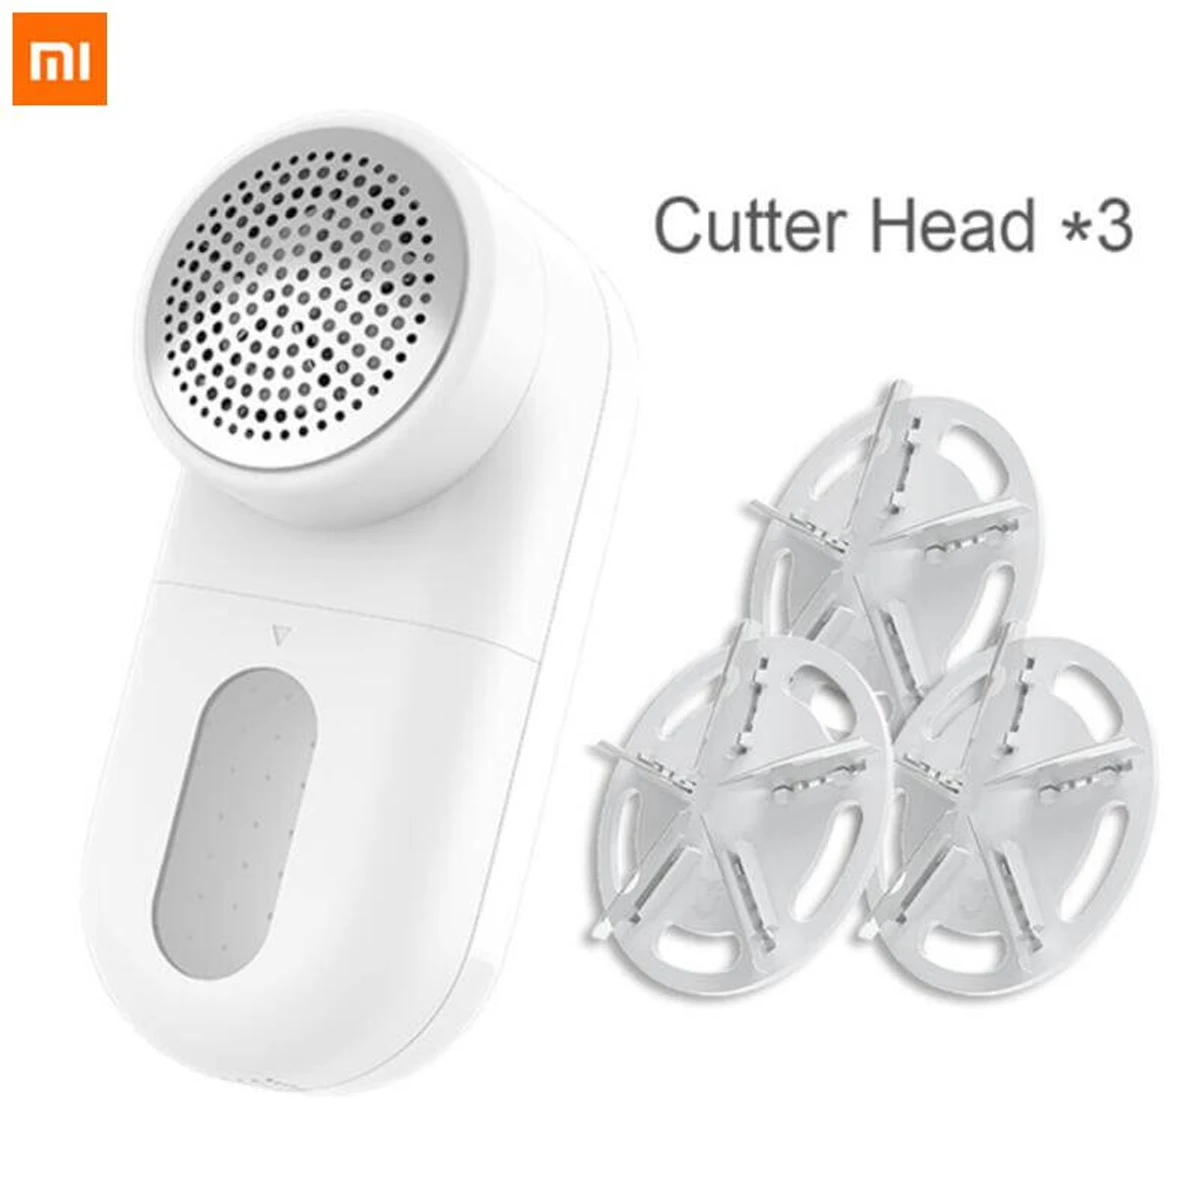 XIAOMI MIJIA Lint Remover Cutters Portable Charge Fabric Clothes Fuzz Pellet Trimmer Machine from Spools Cutting